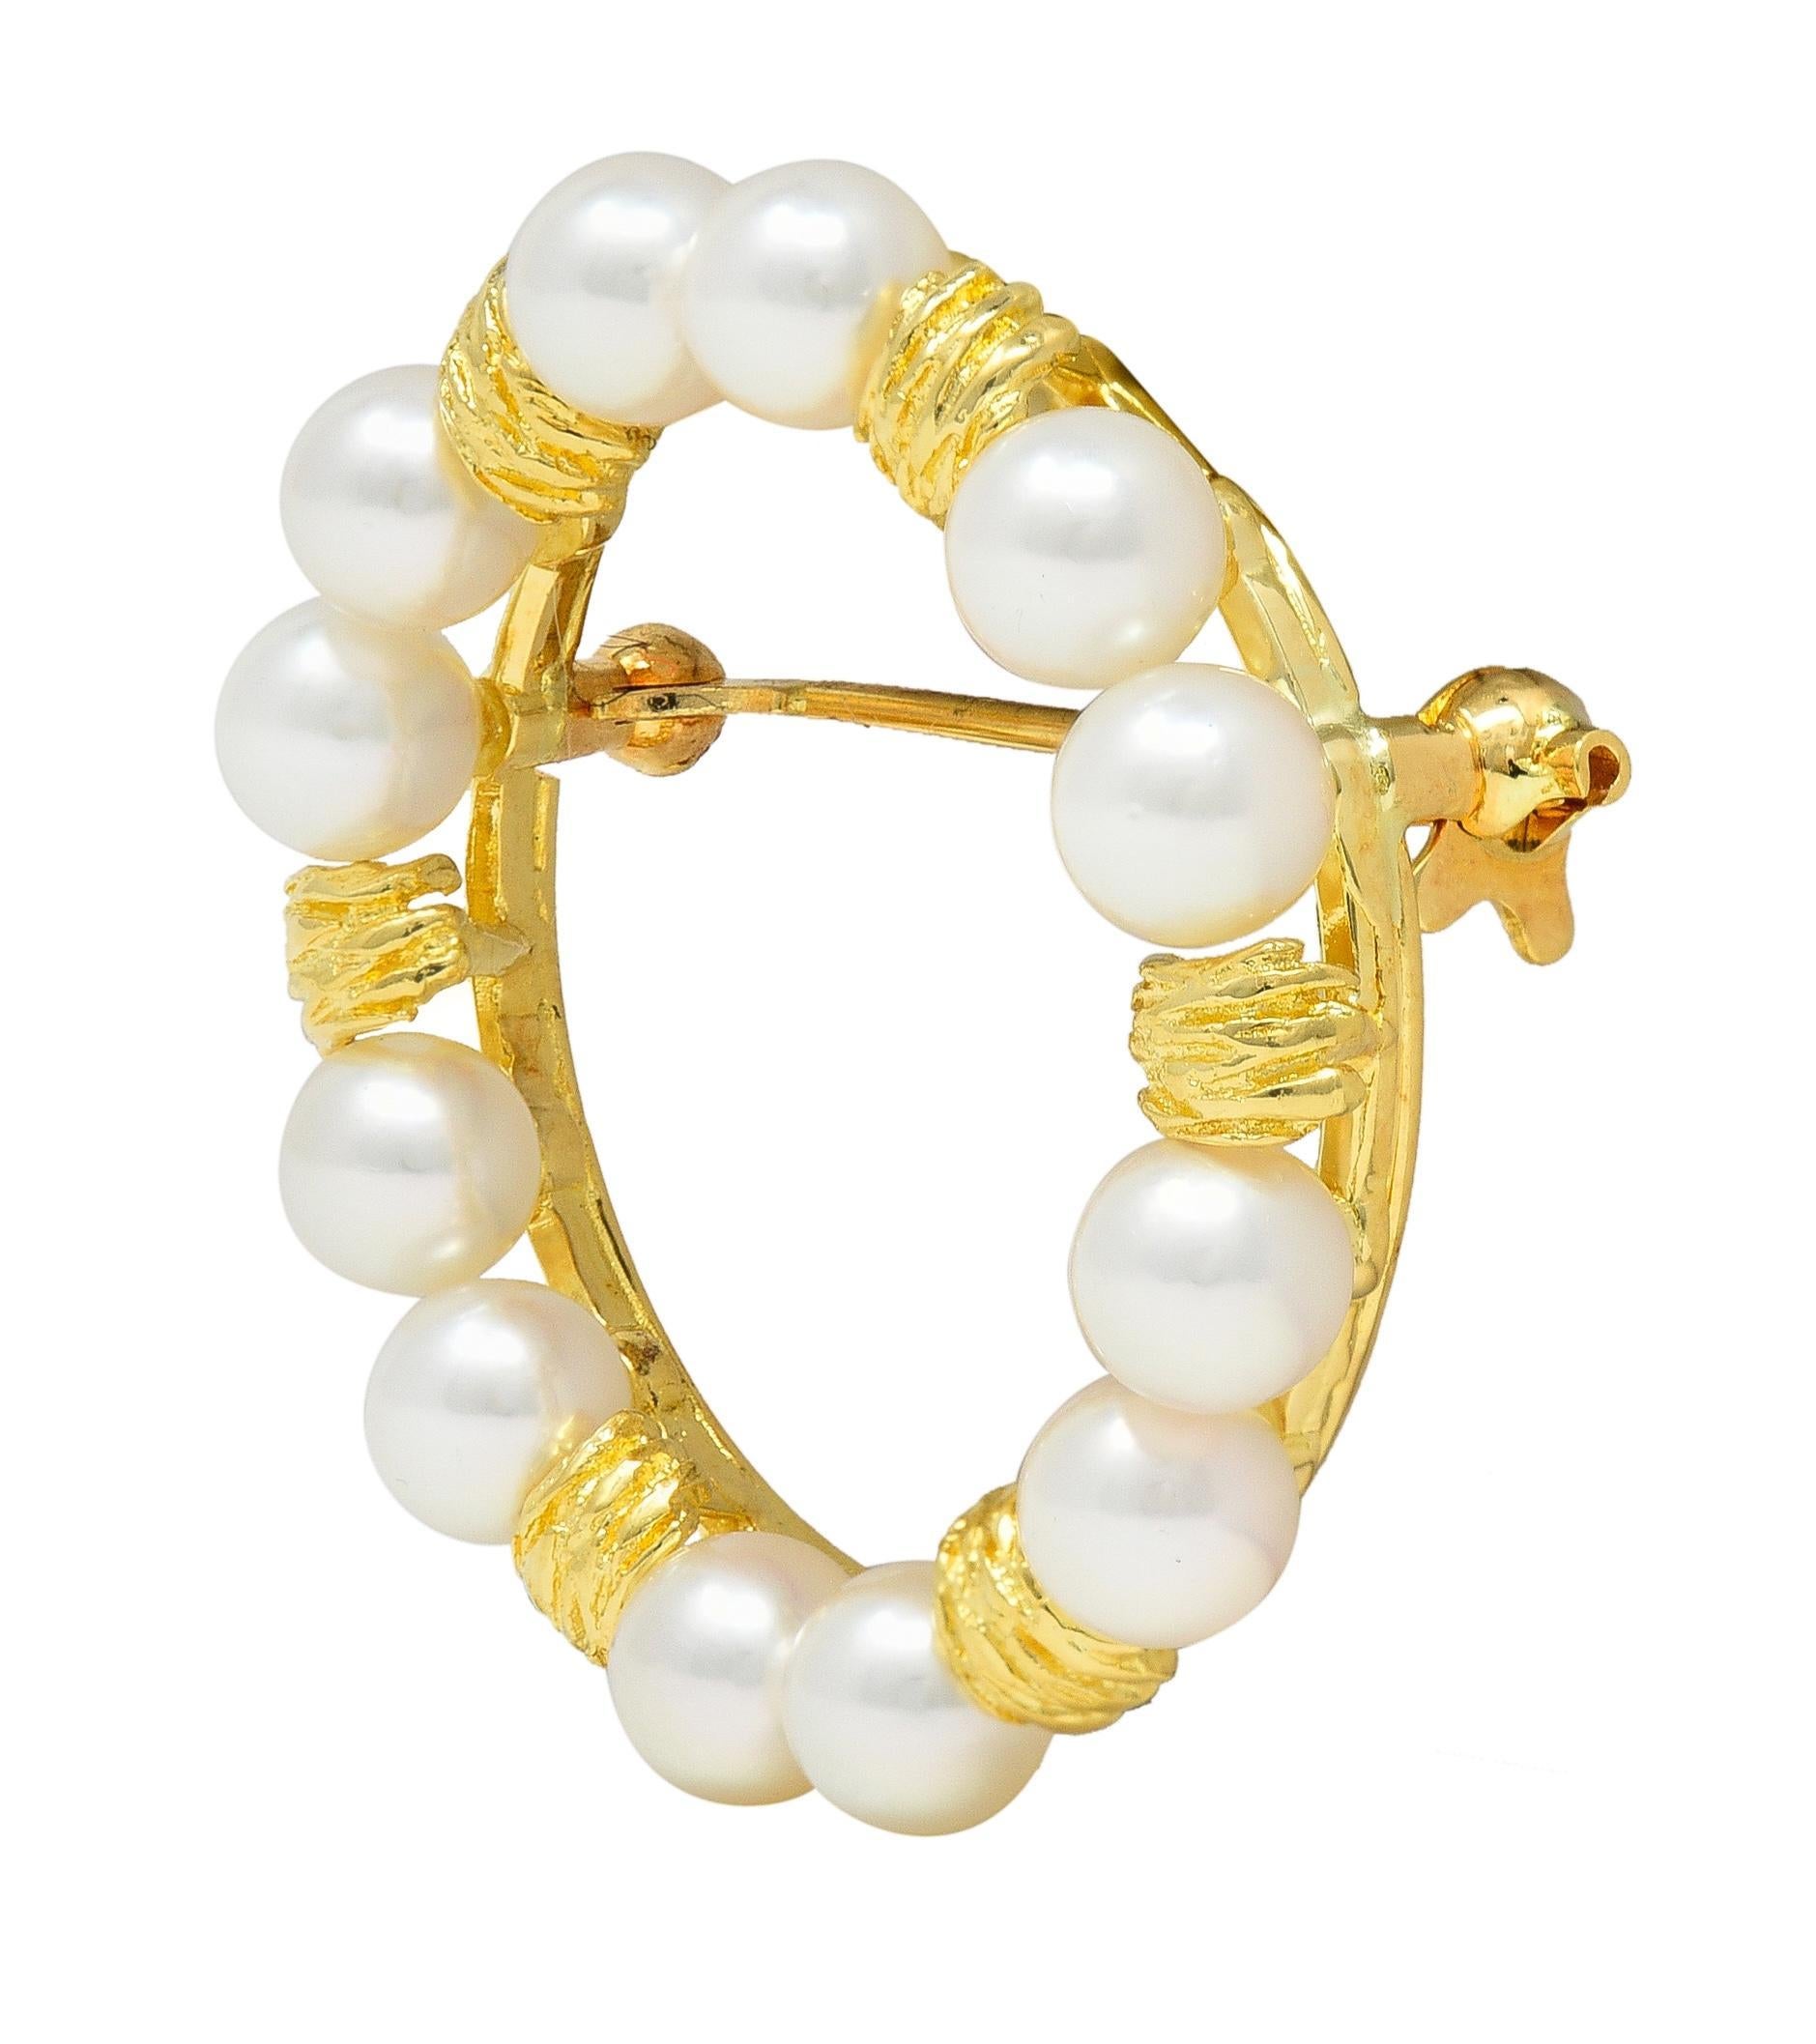 Designed as a circular wreath brooch featuring alternating round pearls and textured gold stations
Round pearls measuring approximately 5.1 mm
Pearls are cream in color with iridescence
Completed with hinged pin stem and locking closure
Stamped 750